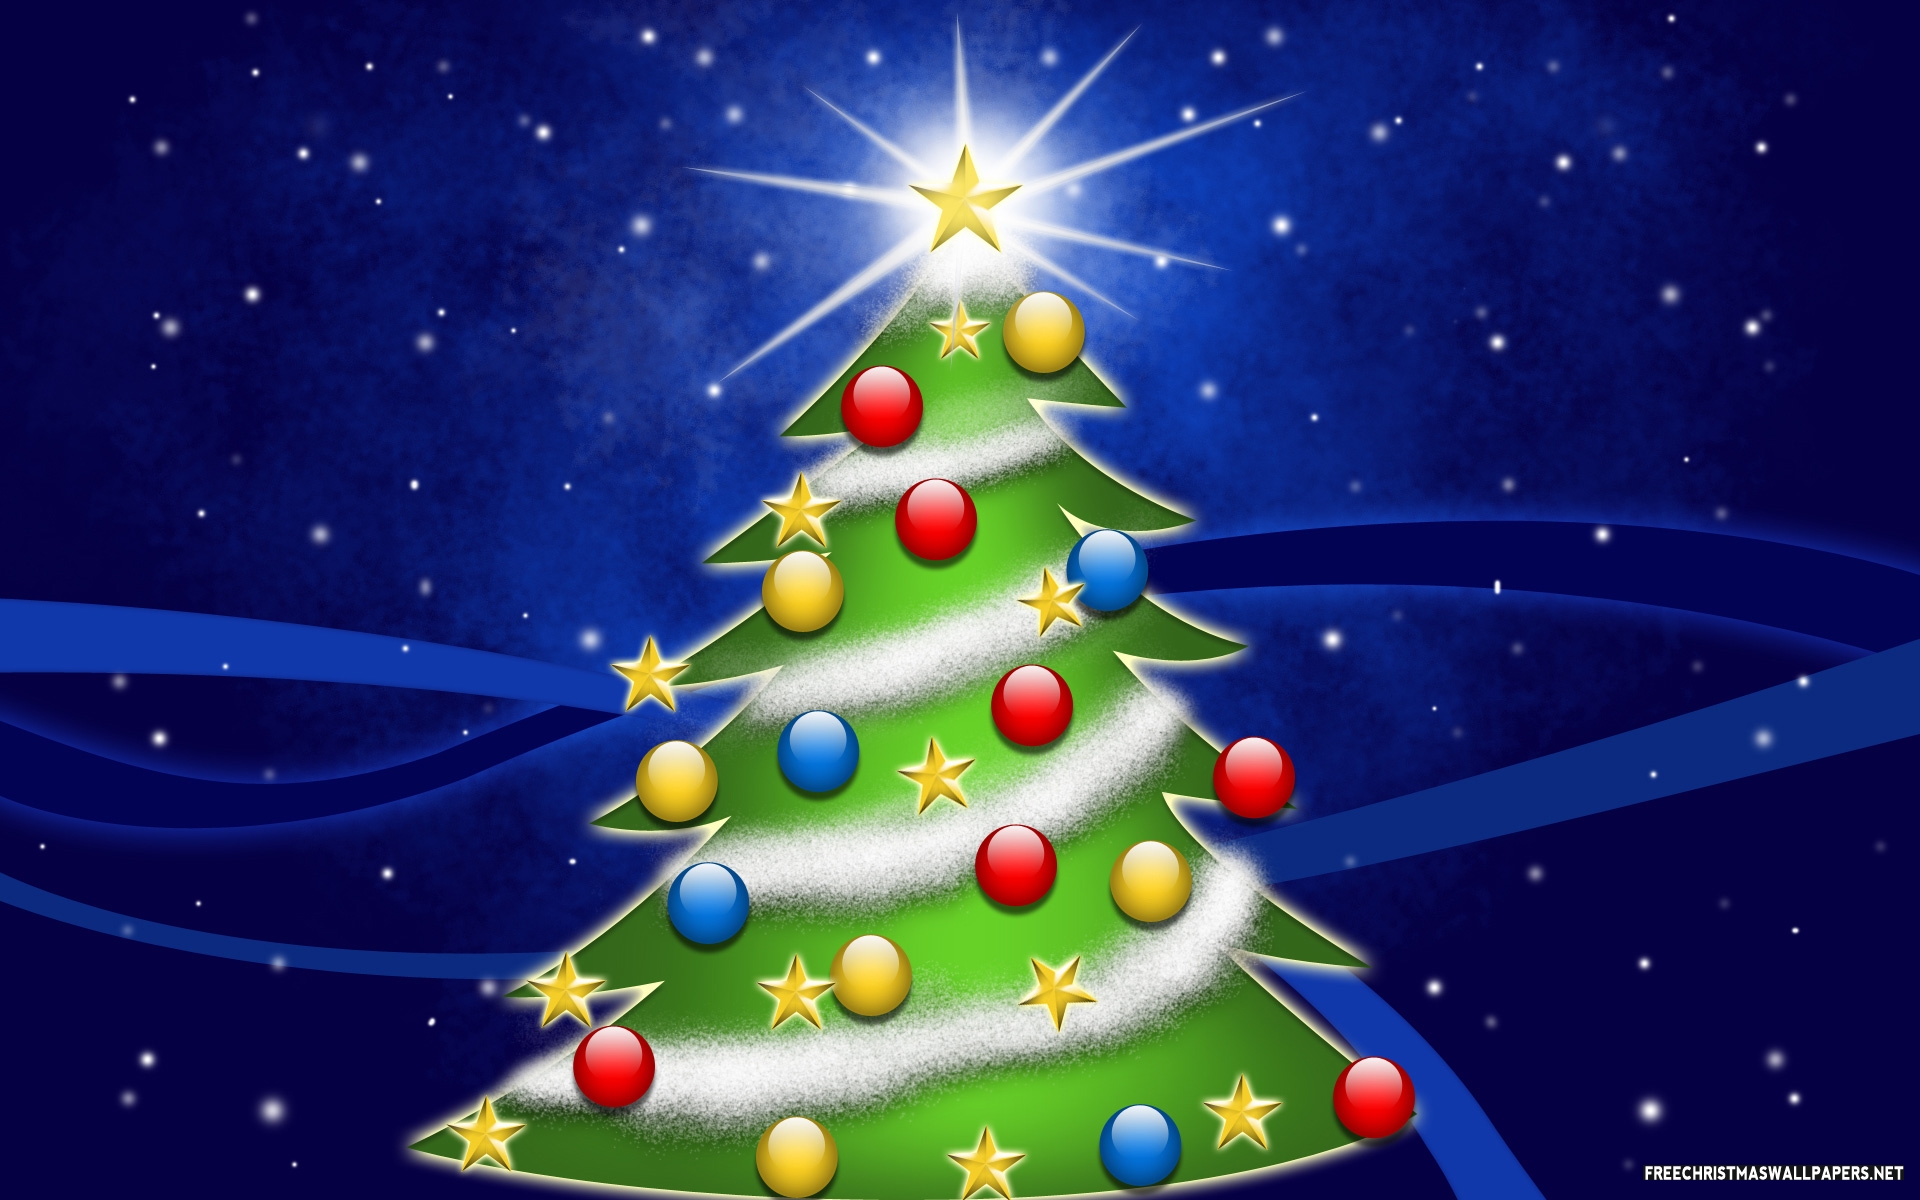 Christmas Tree, Star, Bells...What do They Signify? - Hyderabad India Online